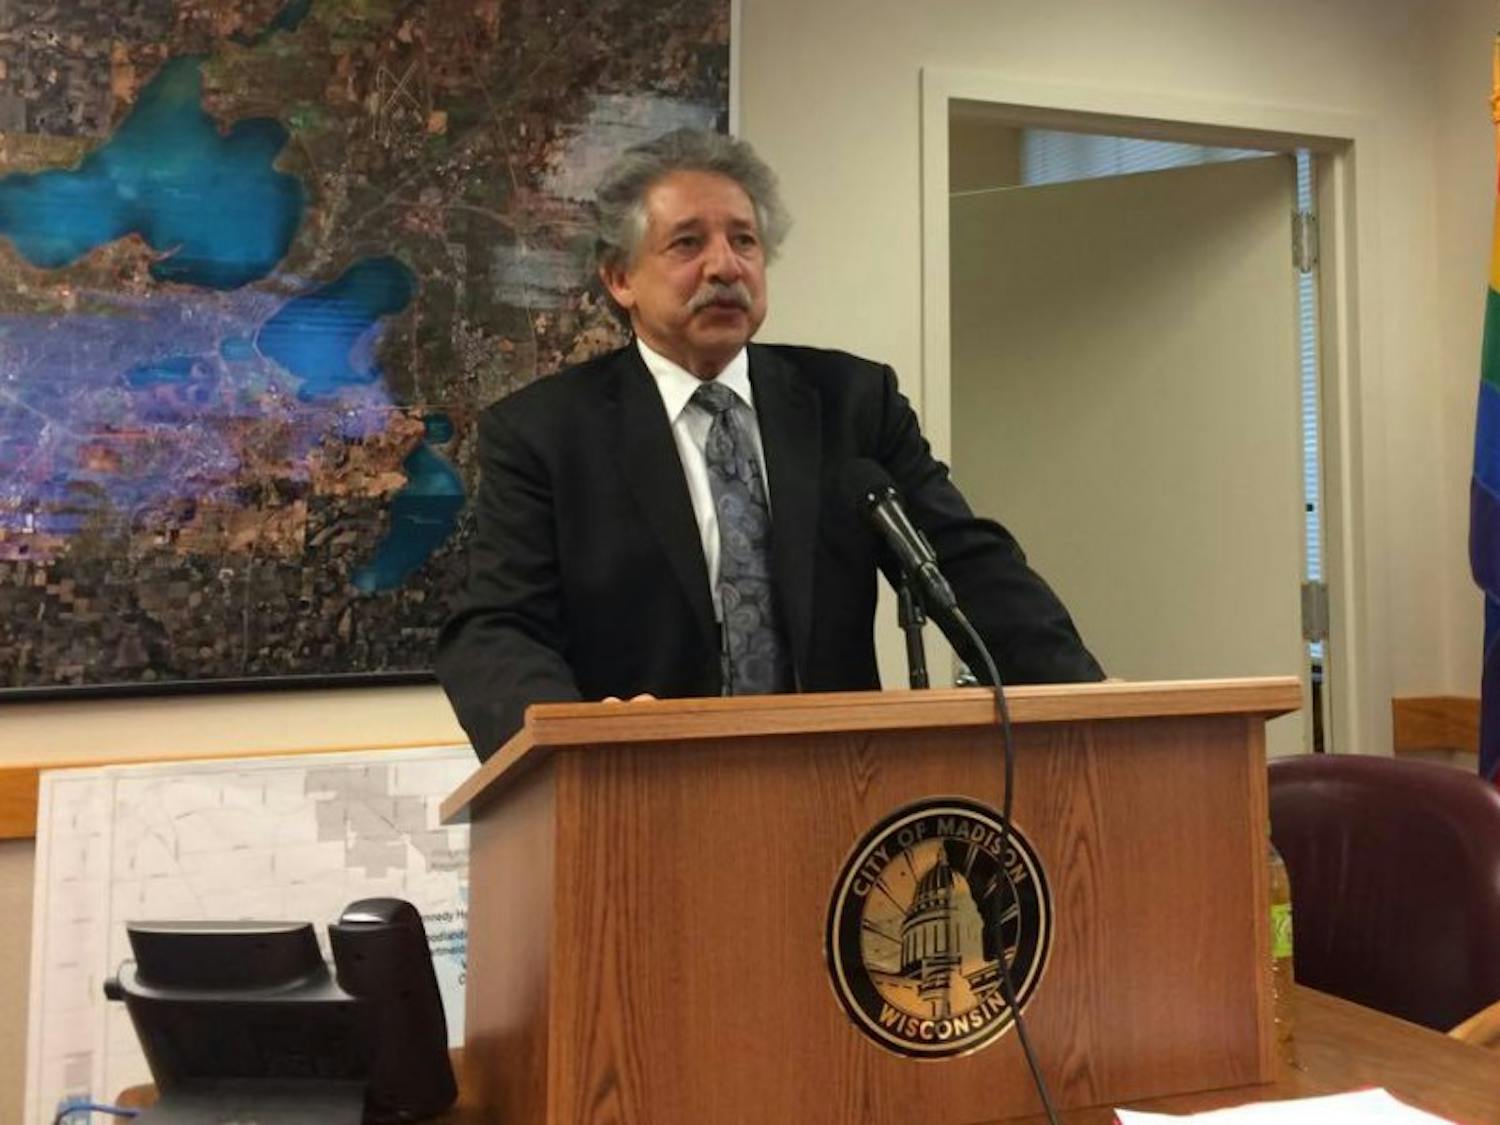 Mayor Paul Soglin&nbsp;said he agreed with those “speaking out and taking action" to remove monuments dedicated to the Confederacy.